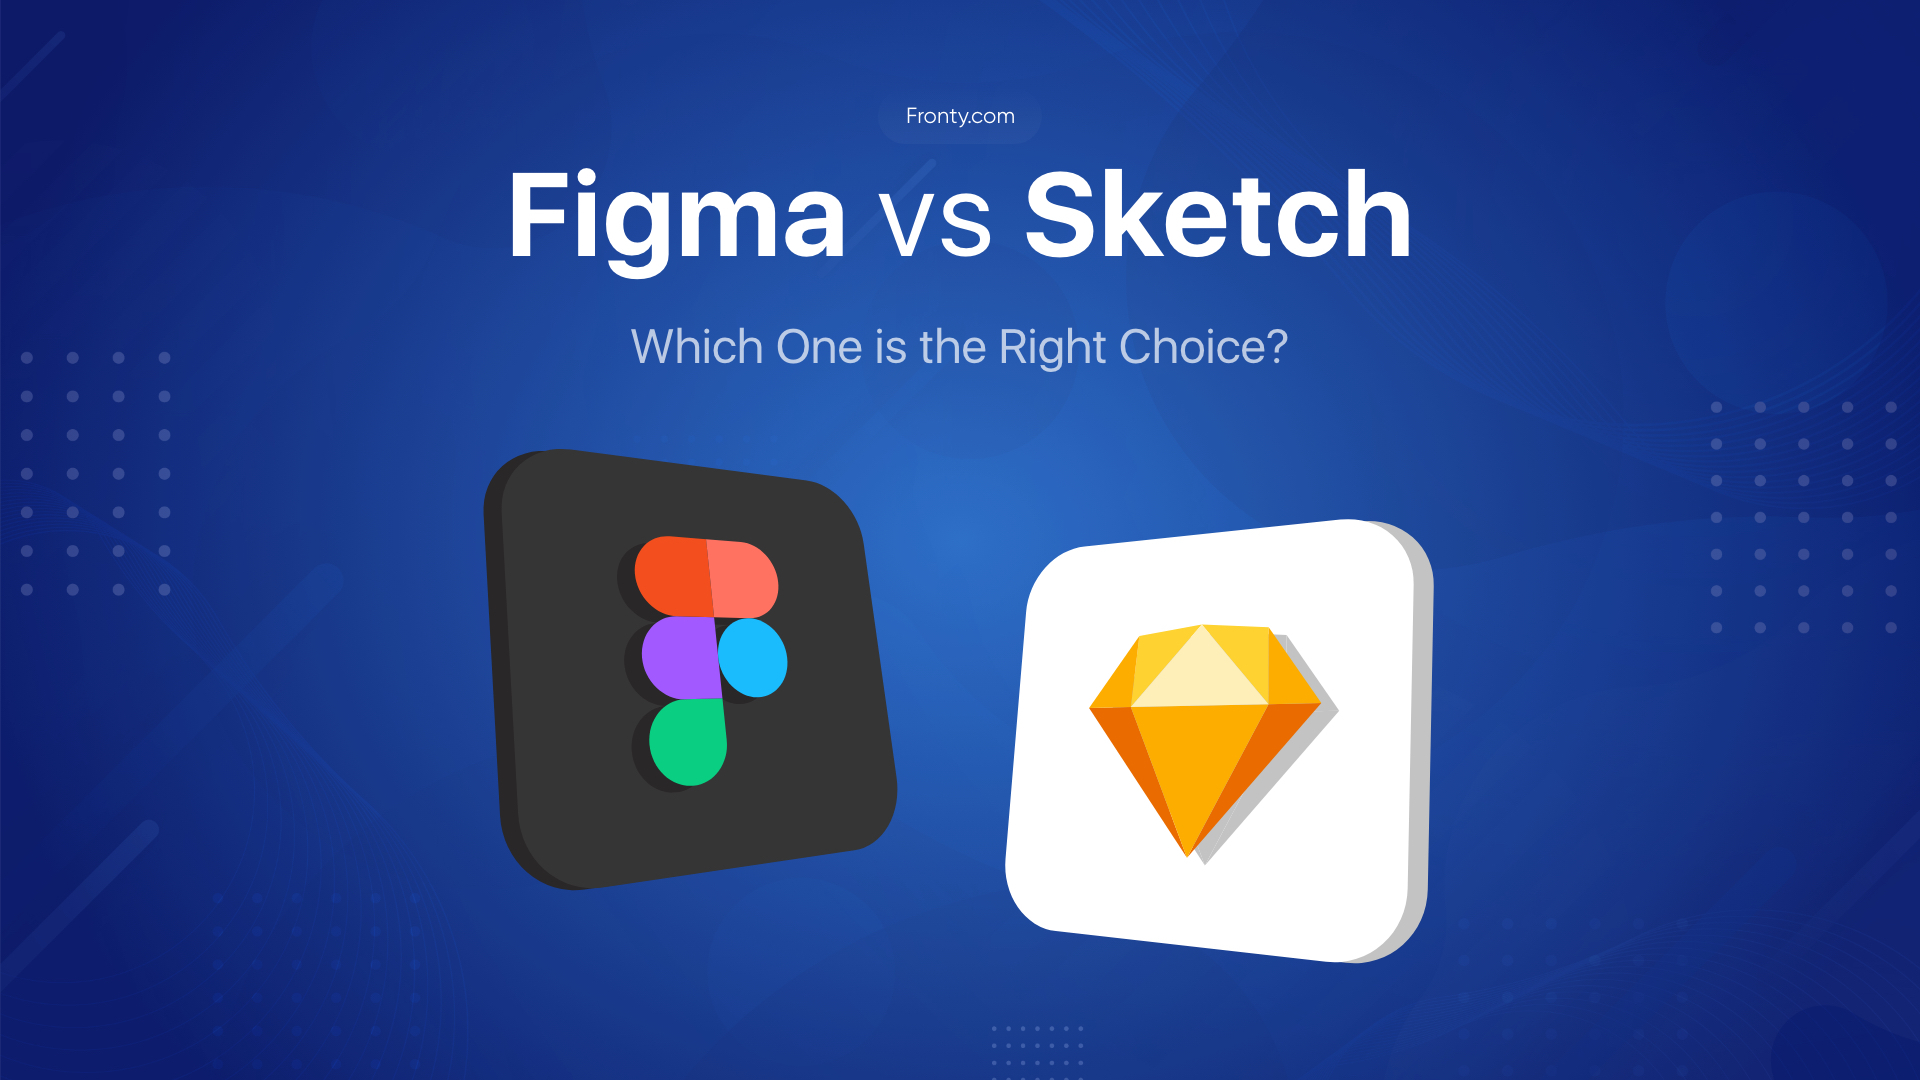 3 reasons why as a digital agency we switched from Sketch to Figma